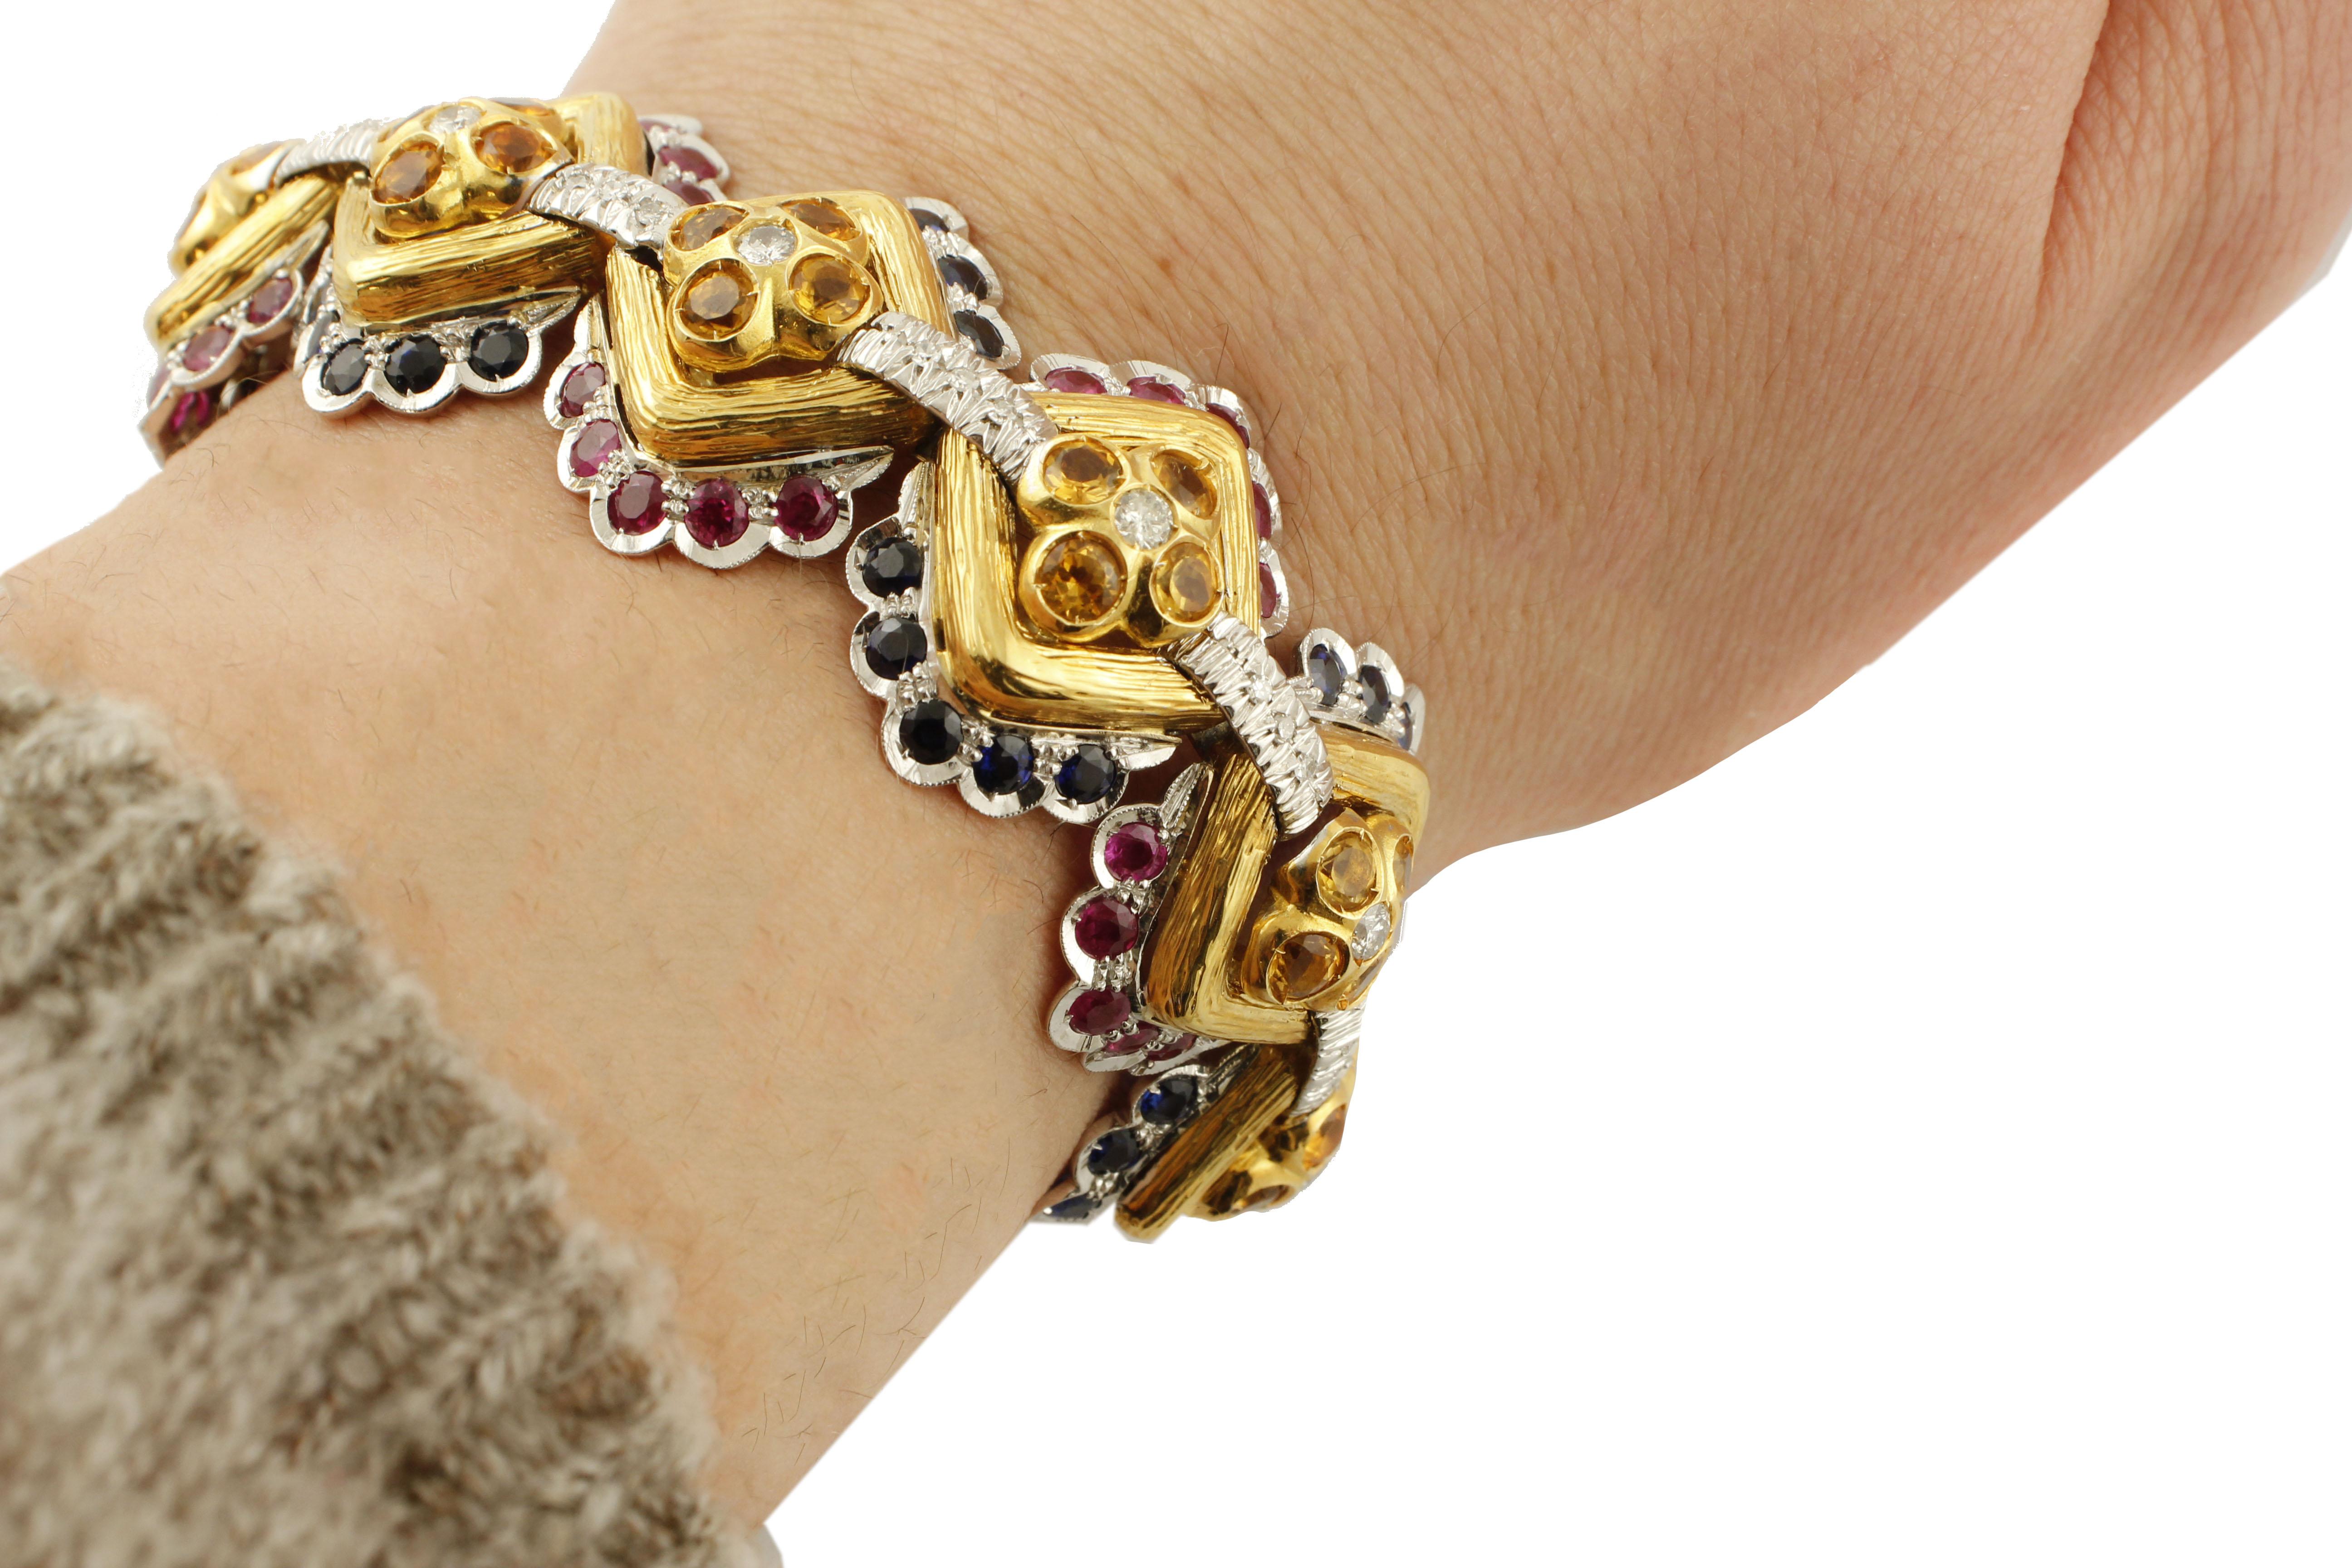 Brilliant Cut White Diamonds, Blue Sapphires, Rubies White and Yellow Gold Link Bracelet For Sale